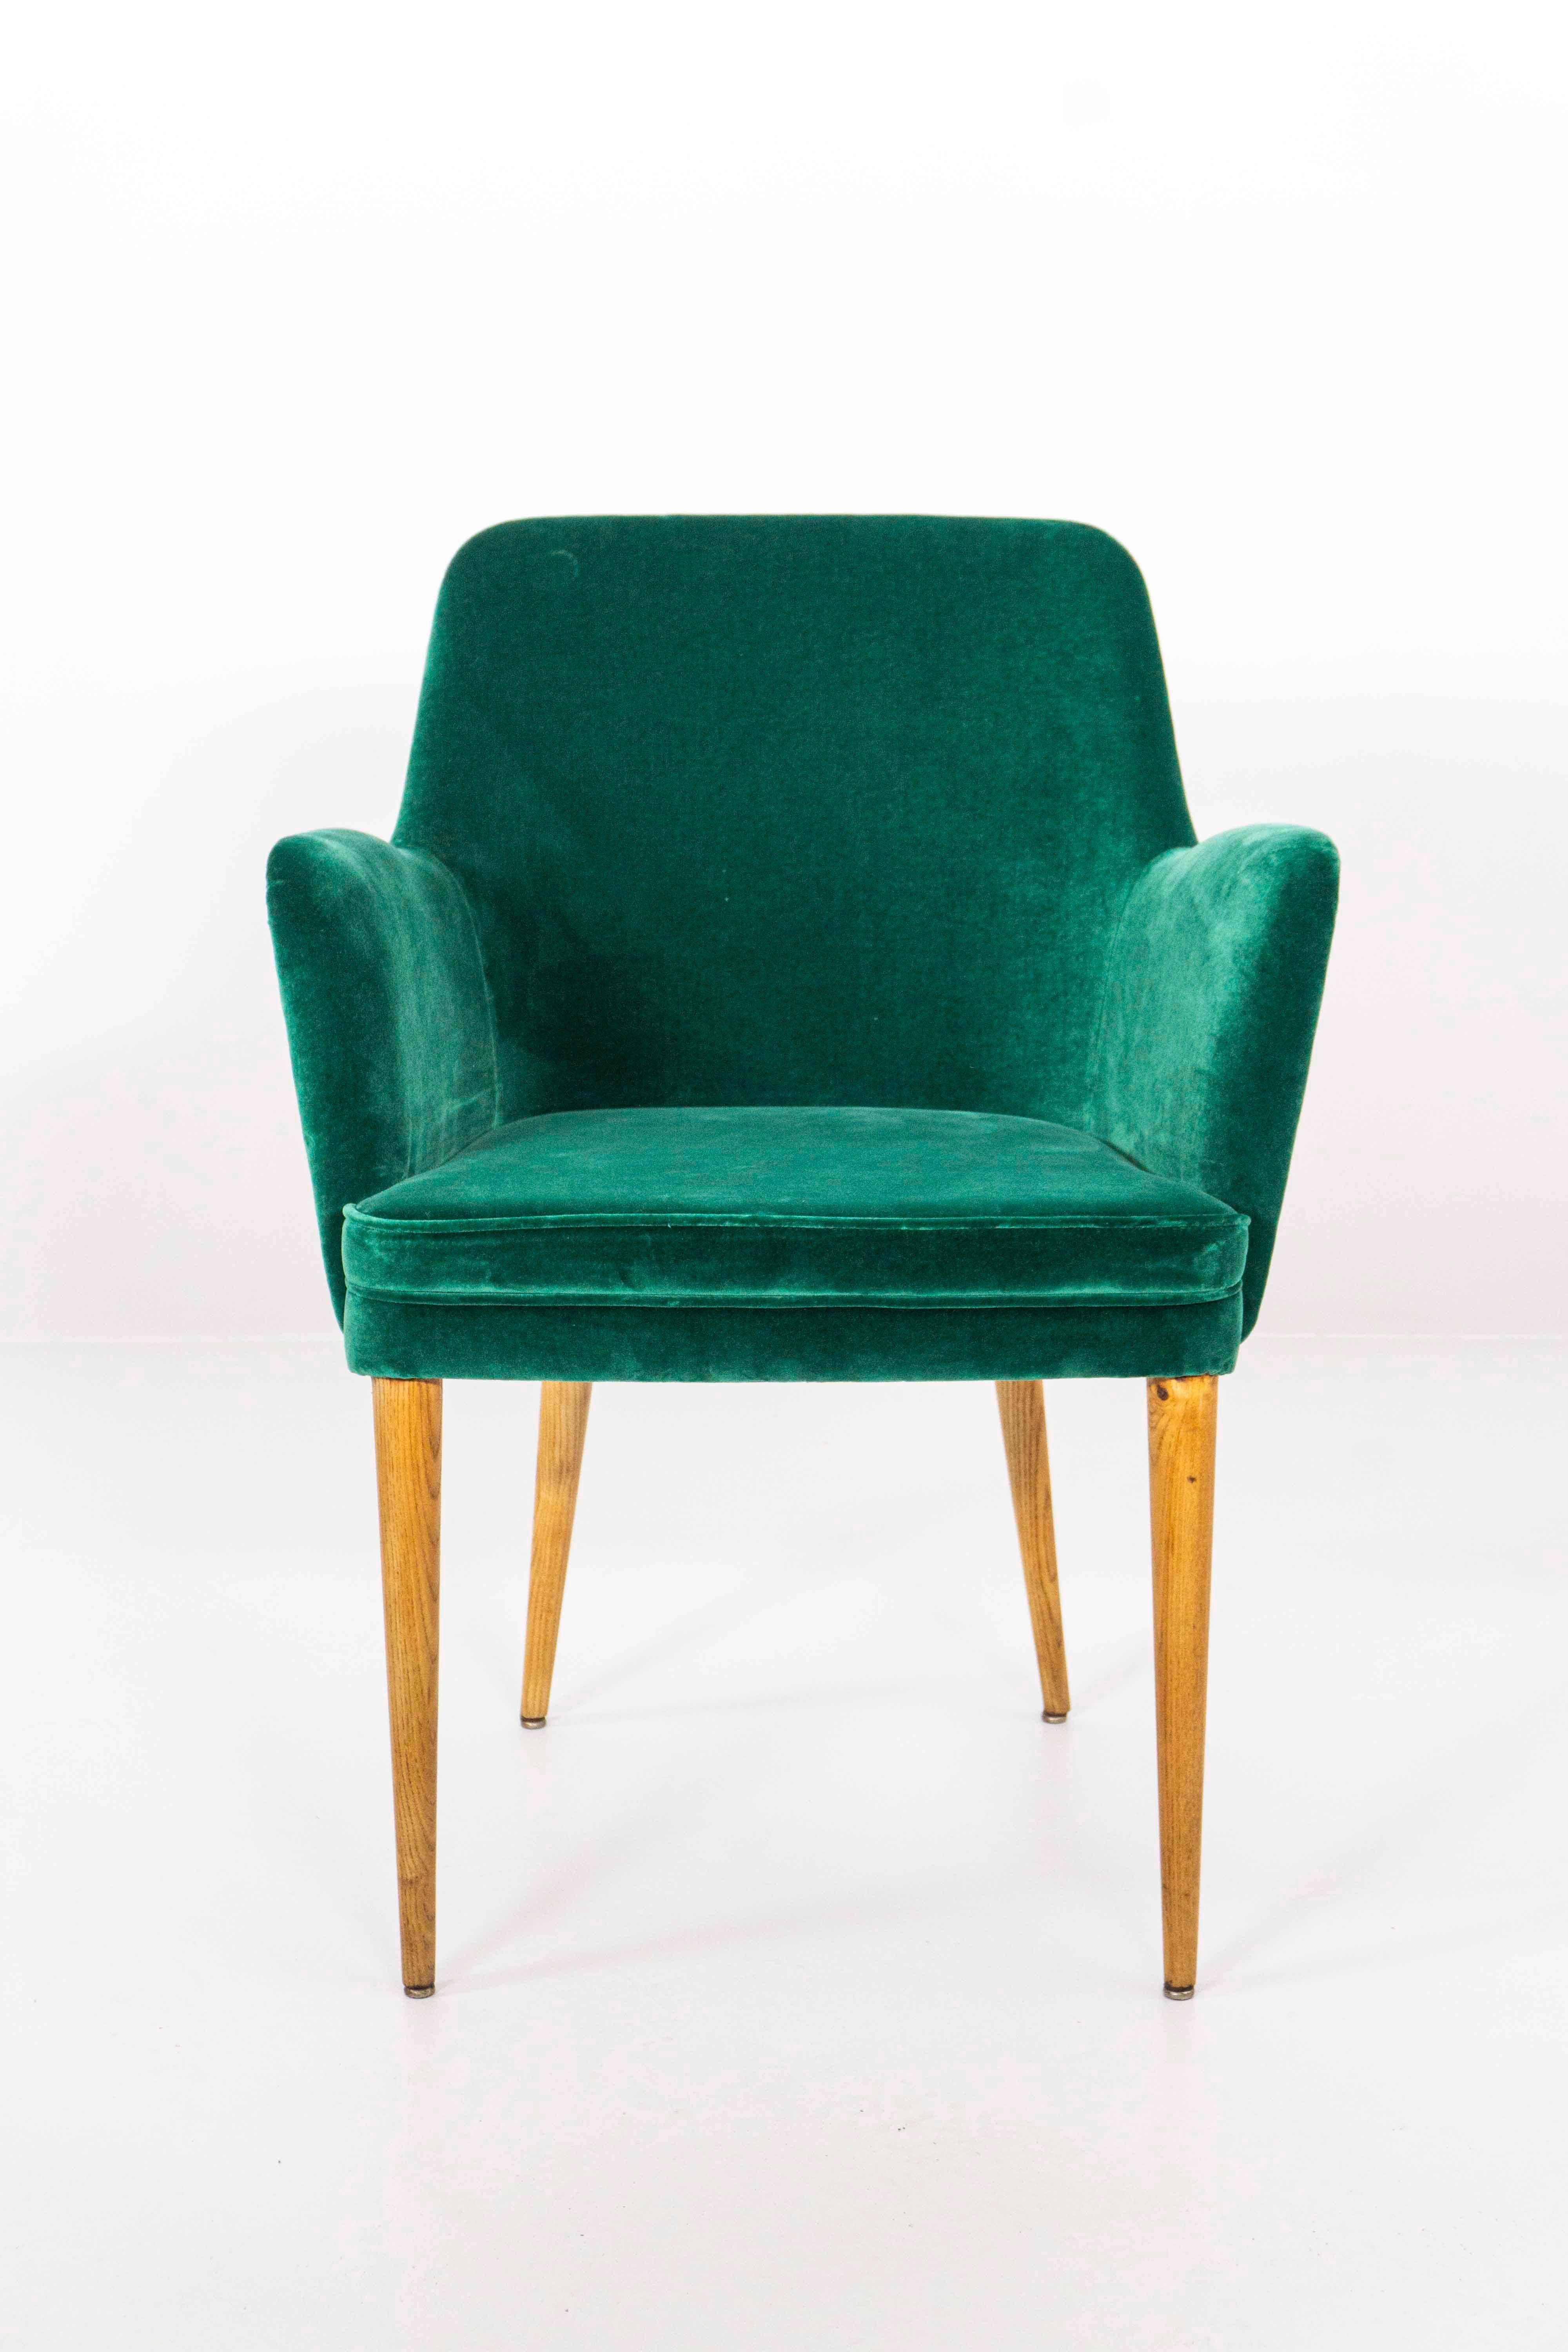 Two elegant and fine arm chairs (Model P 35) by Italian architect and designer Osvaldo Borsani. The chairs can be bought as a pair or individually.

Upholstered seat, velvet cover and upholstery renewed with a high-quality velvet by the Italian